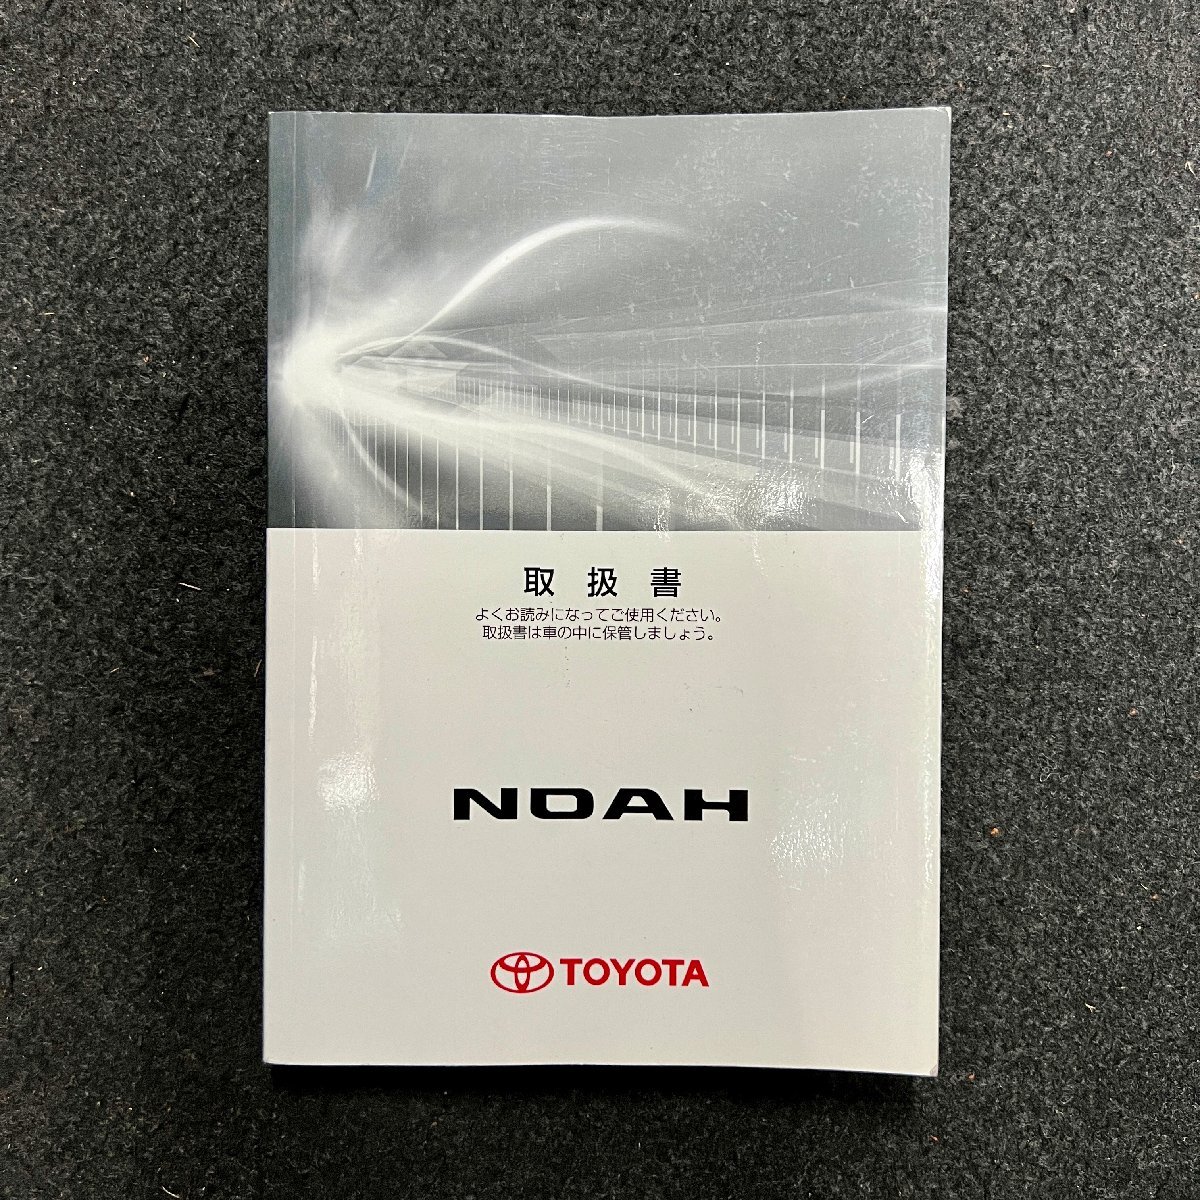  owner manual Noah ZRR70 01999-28696 2007 year 12 month 05 day 5 version 2007 year 11 month 28 day 